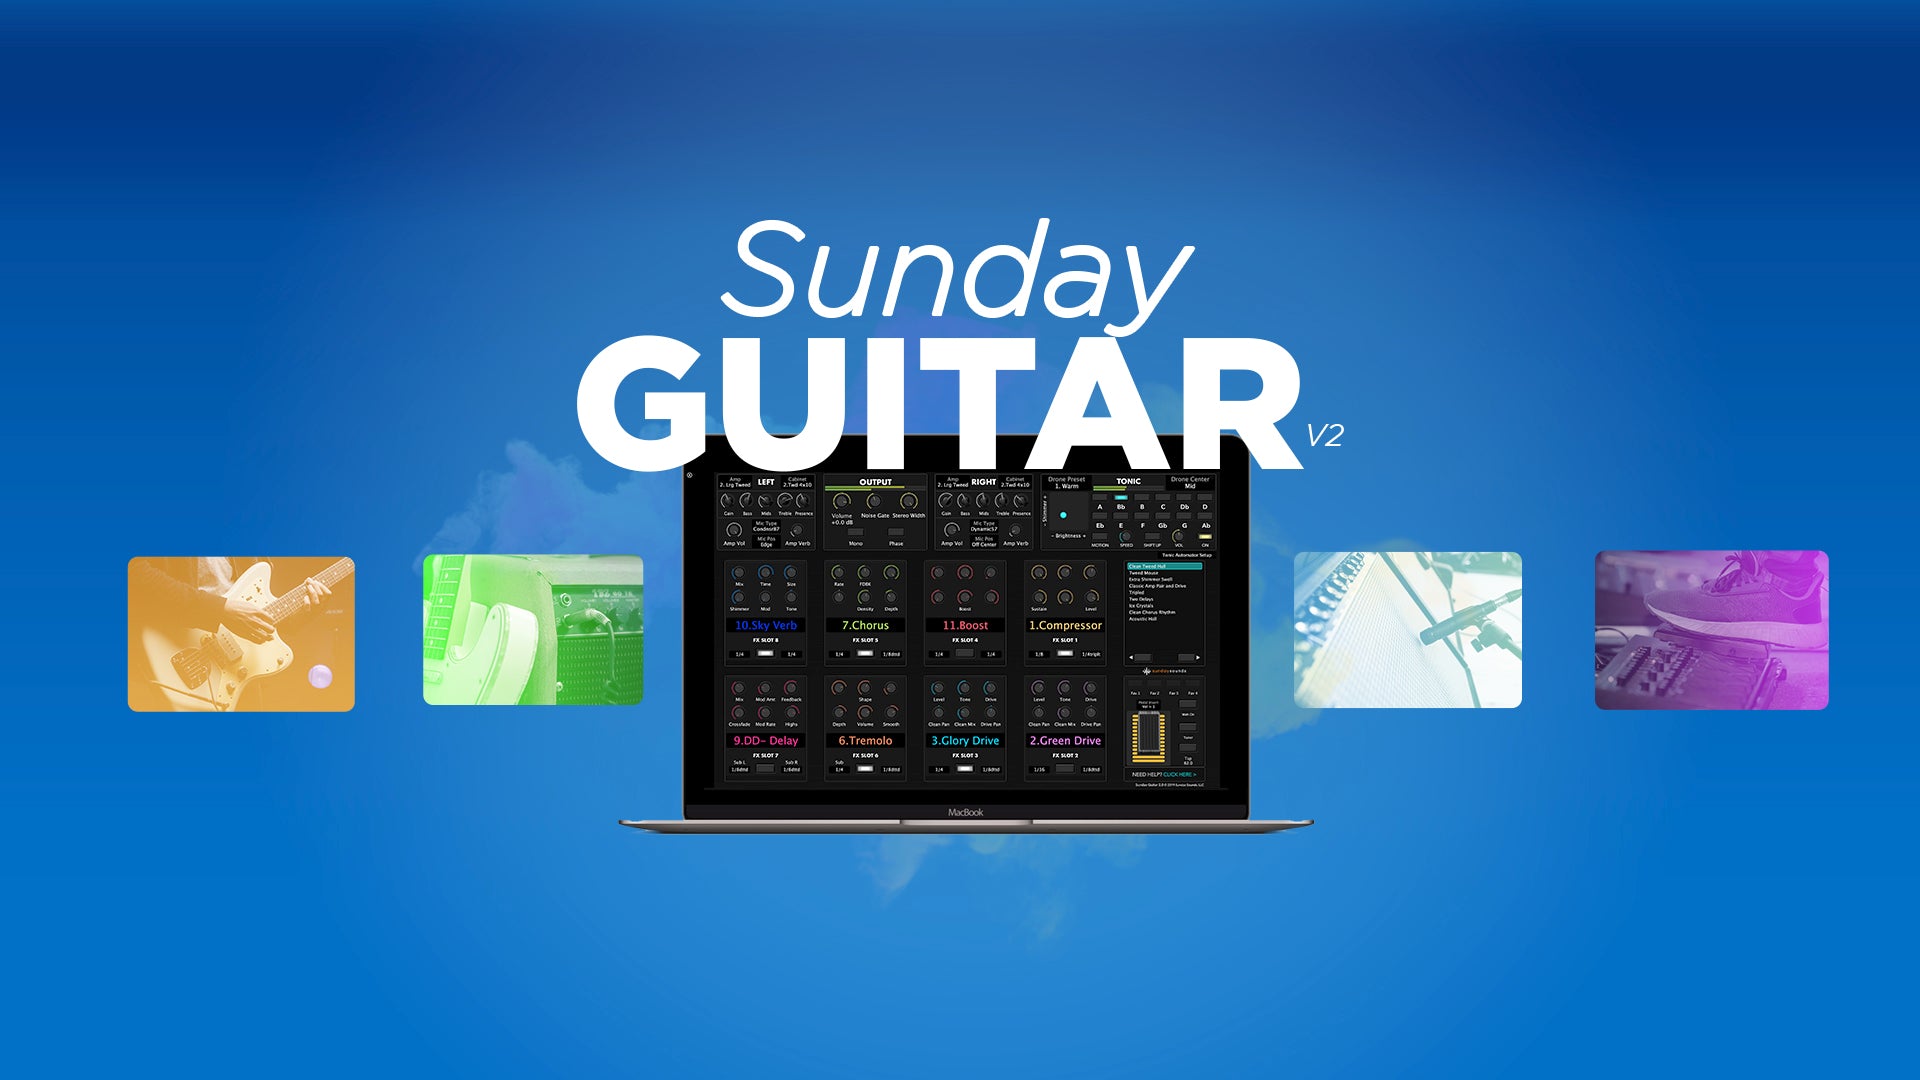 Sunday Guitar Version 2 - Next Level Tone and Control!